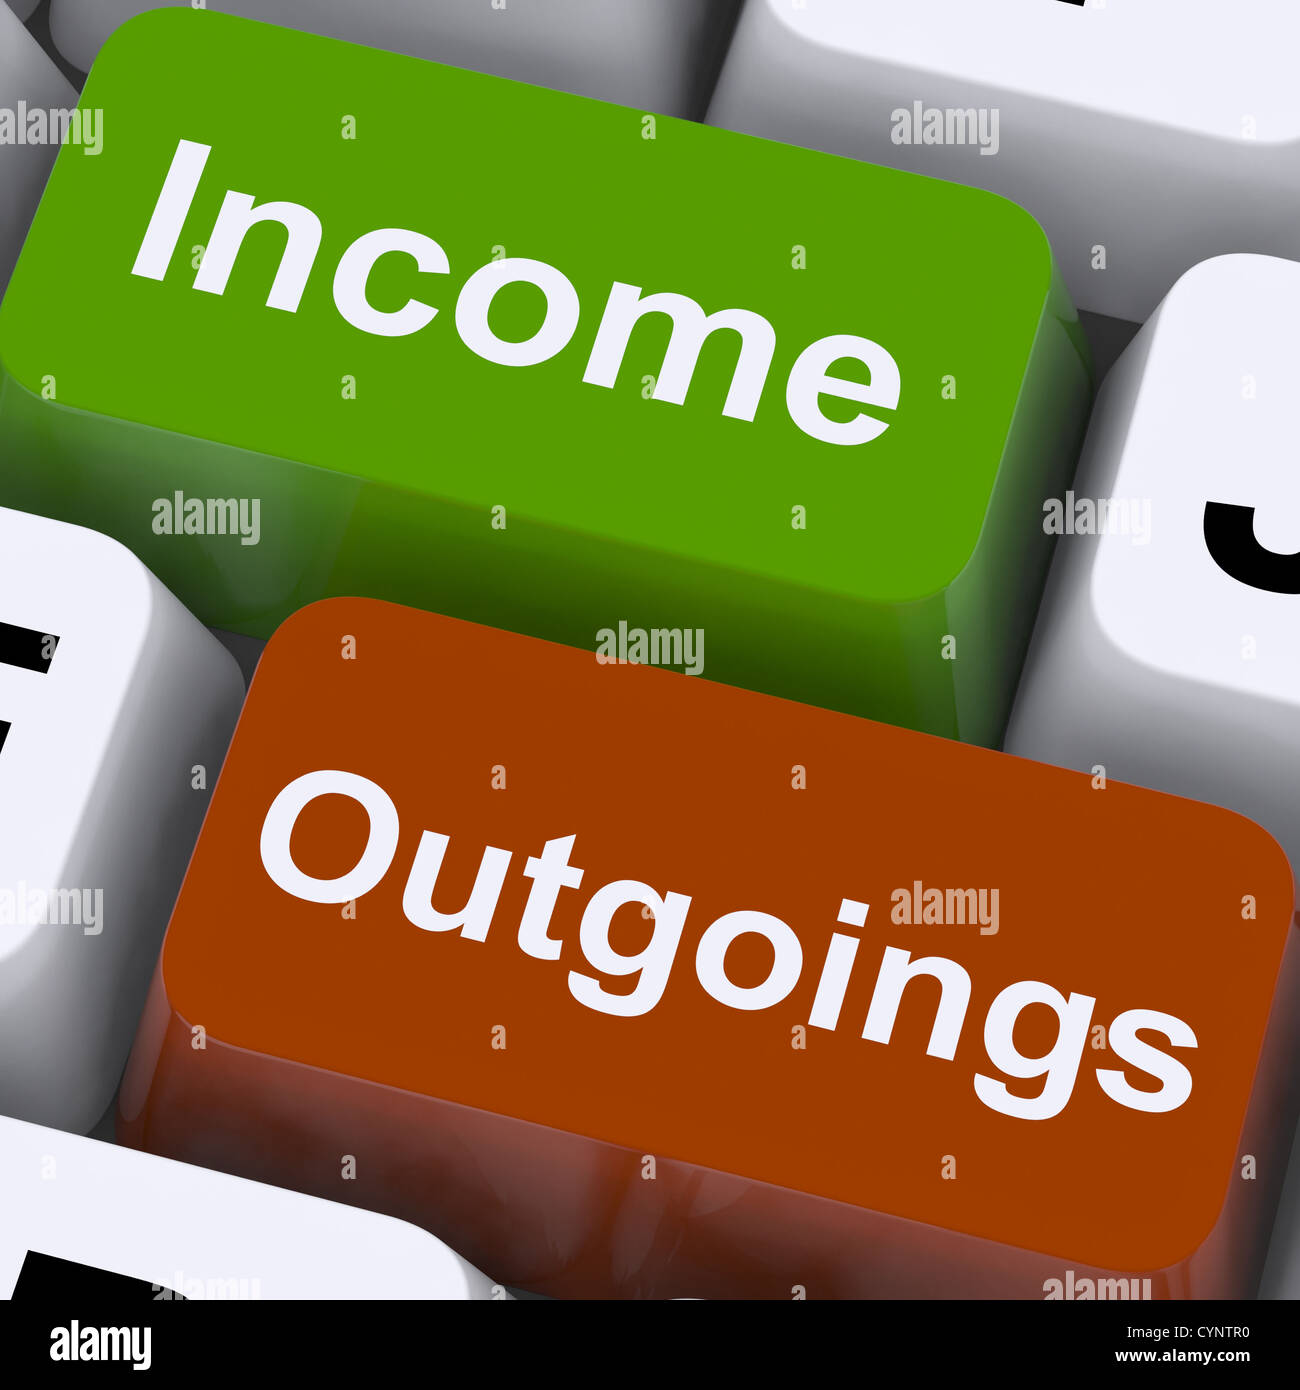 Income Outgoings Keys Showing Budgeting And Bookkeeping Stock Photo